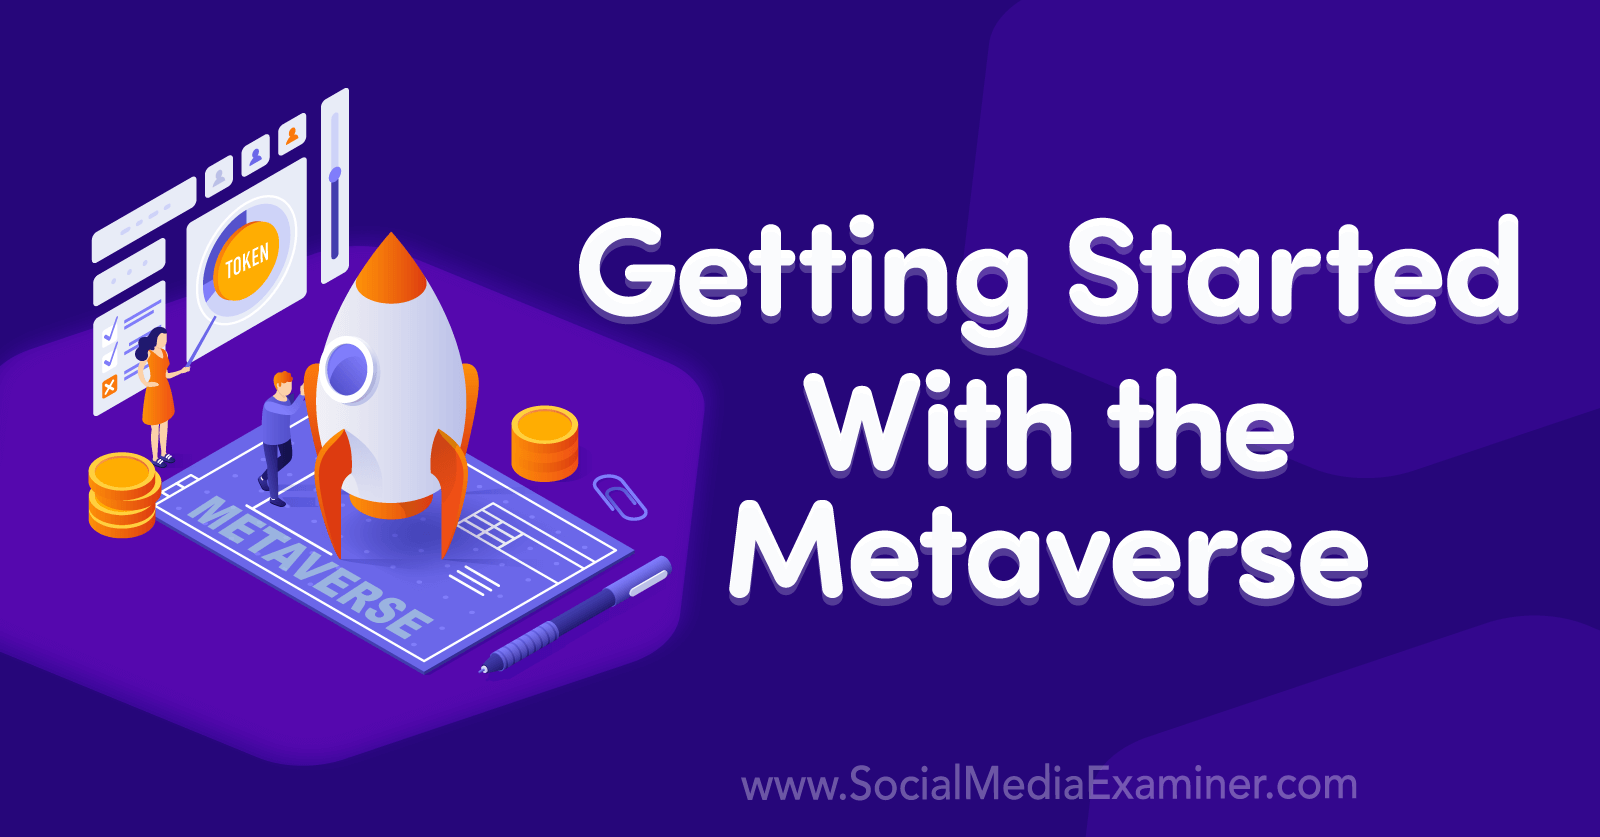 Getting Started With the Metaverse-Social Media Examiner